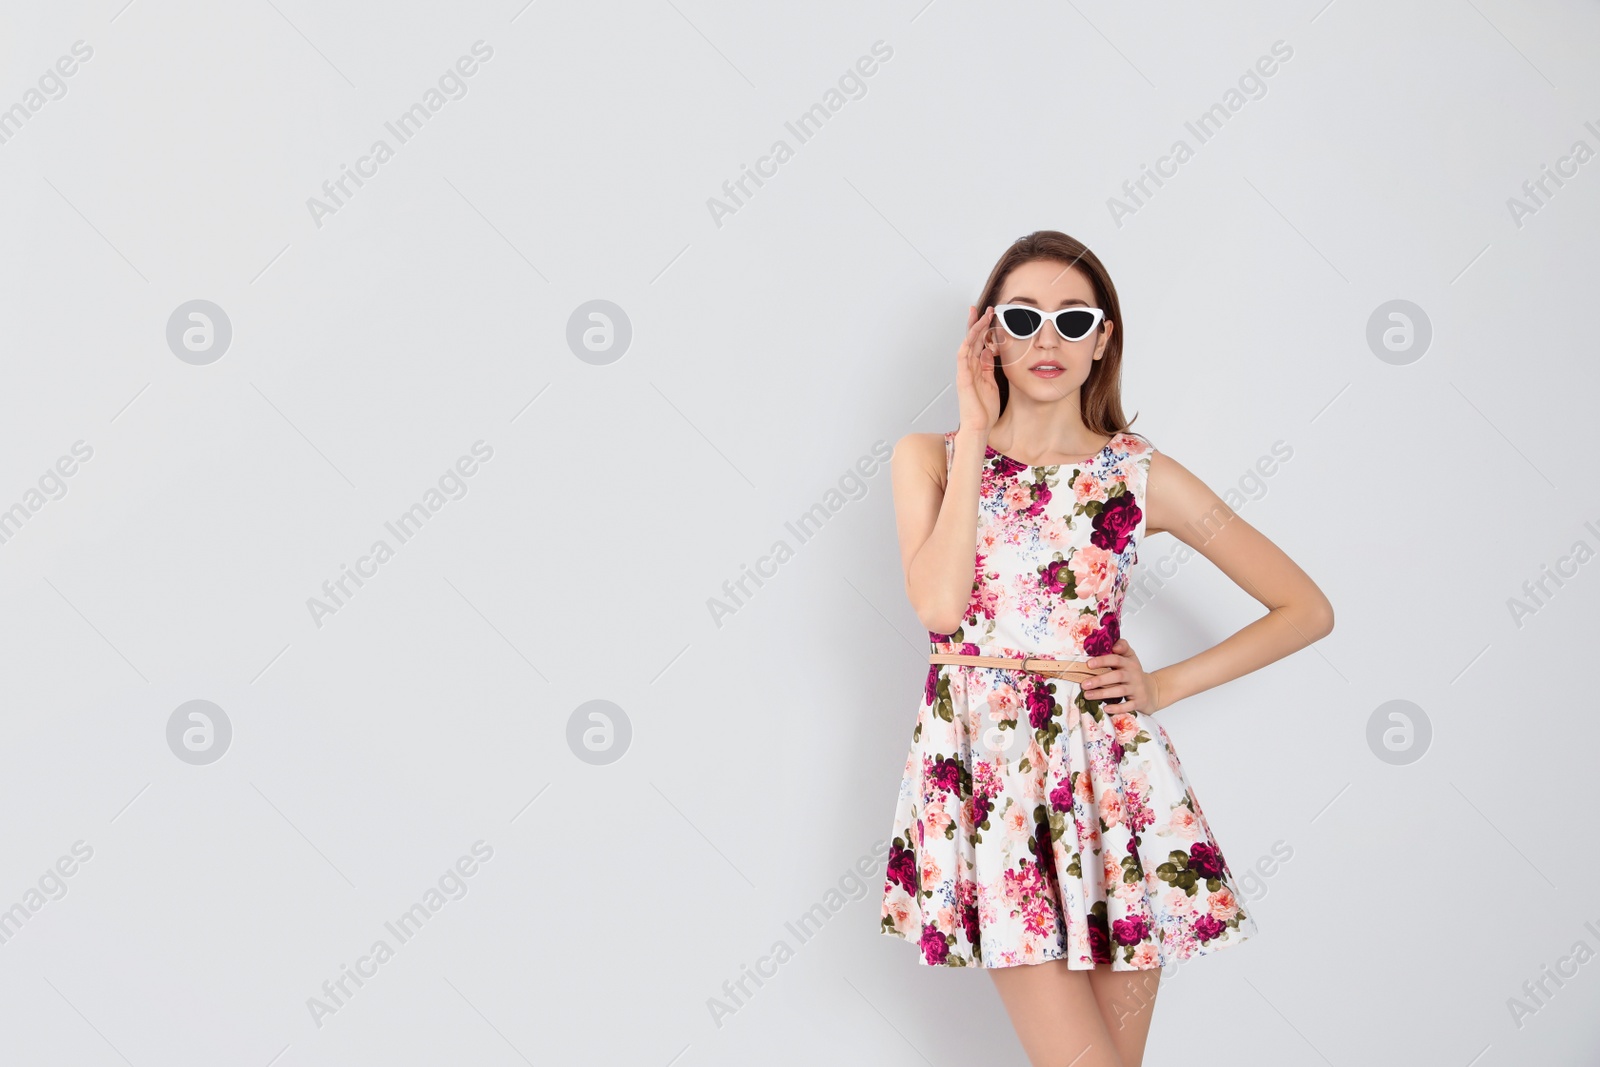 Photo of Young woman wearing floral print dress and stylish sunglasses on light background. Space for text